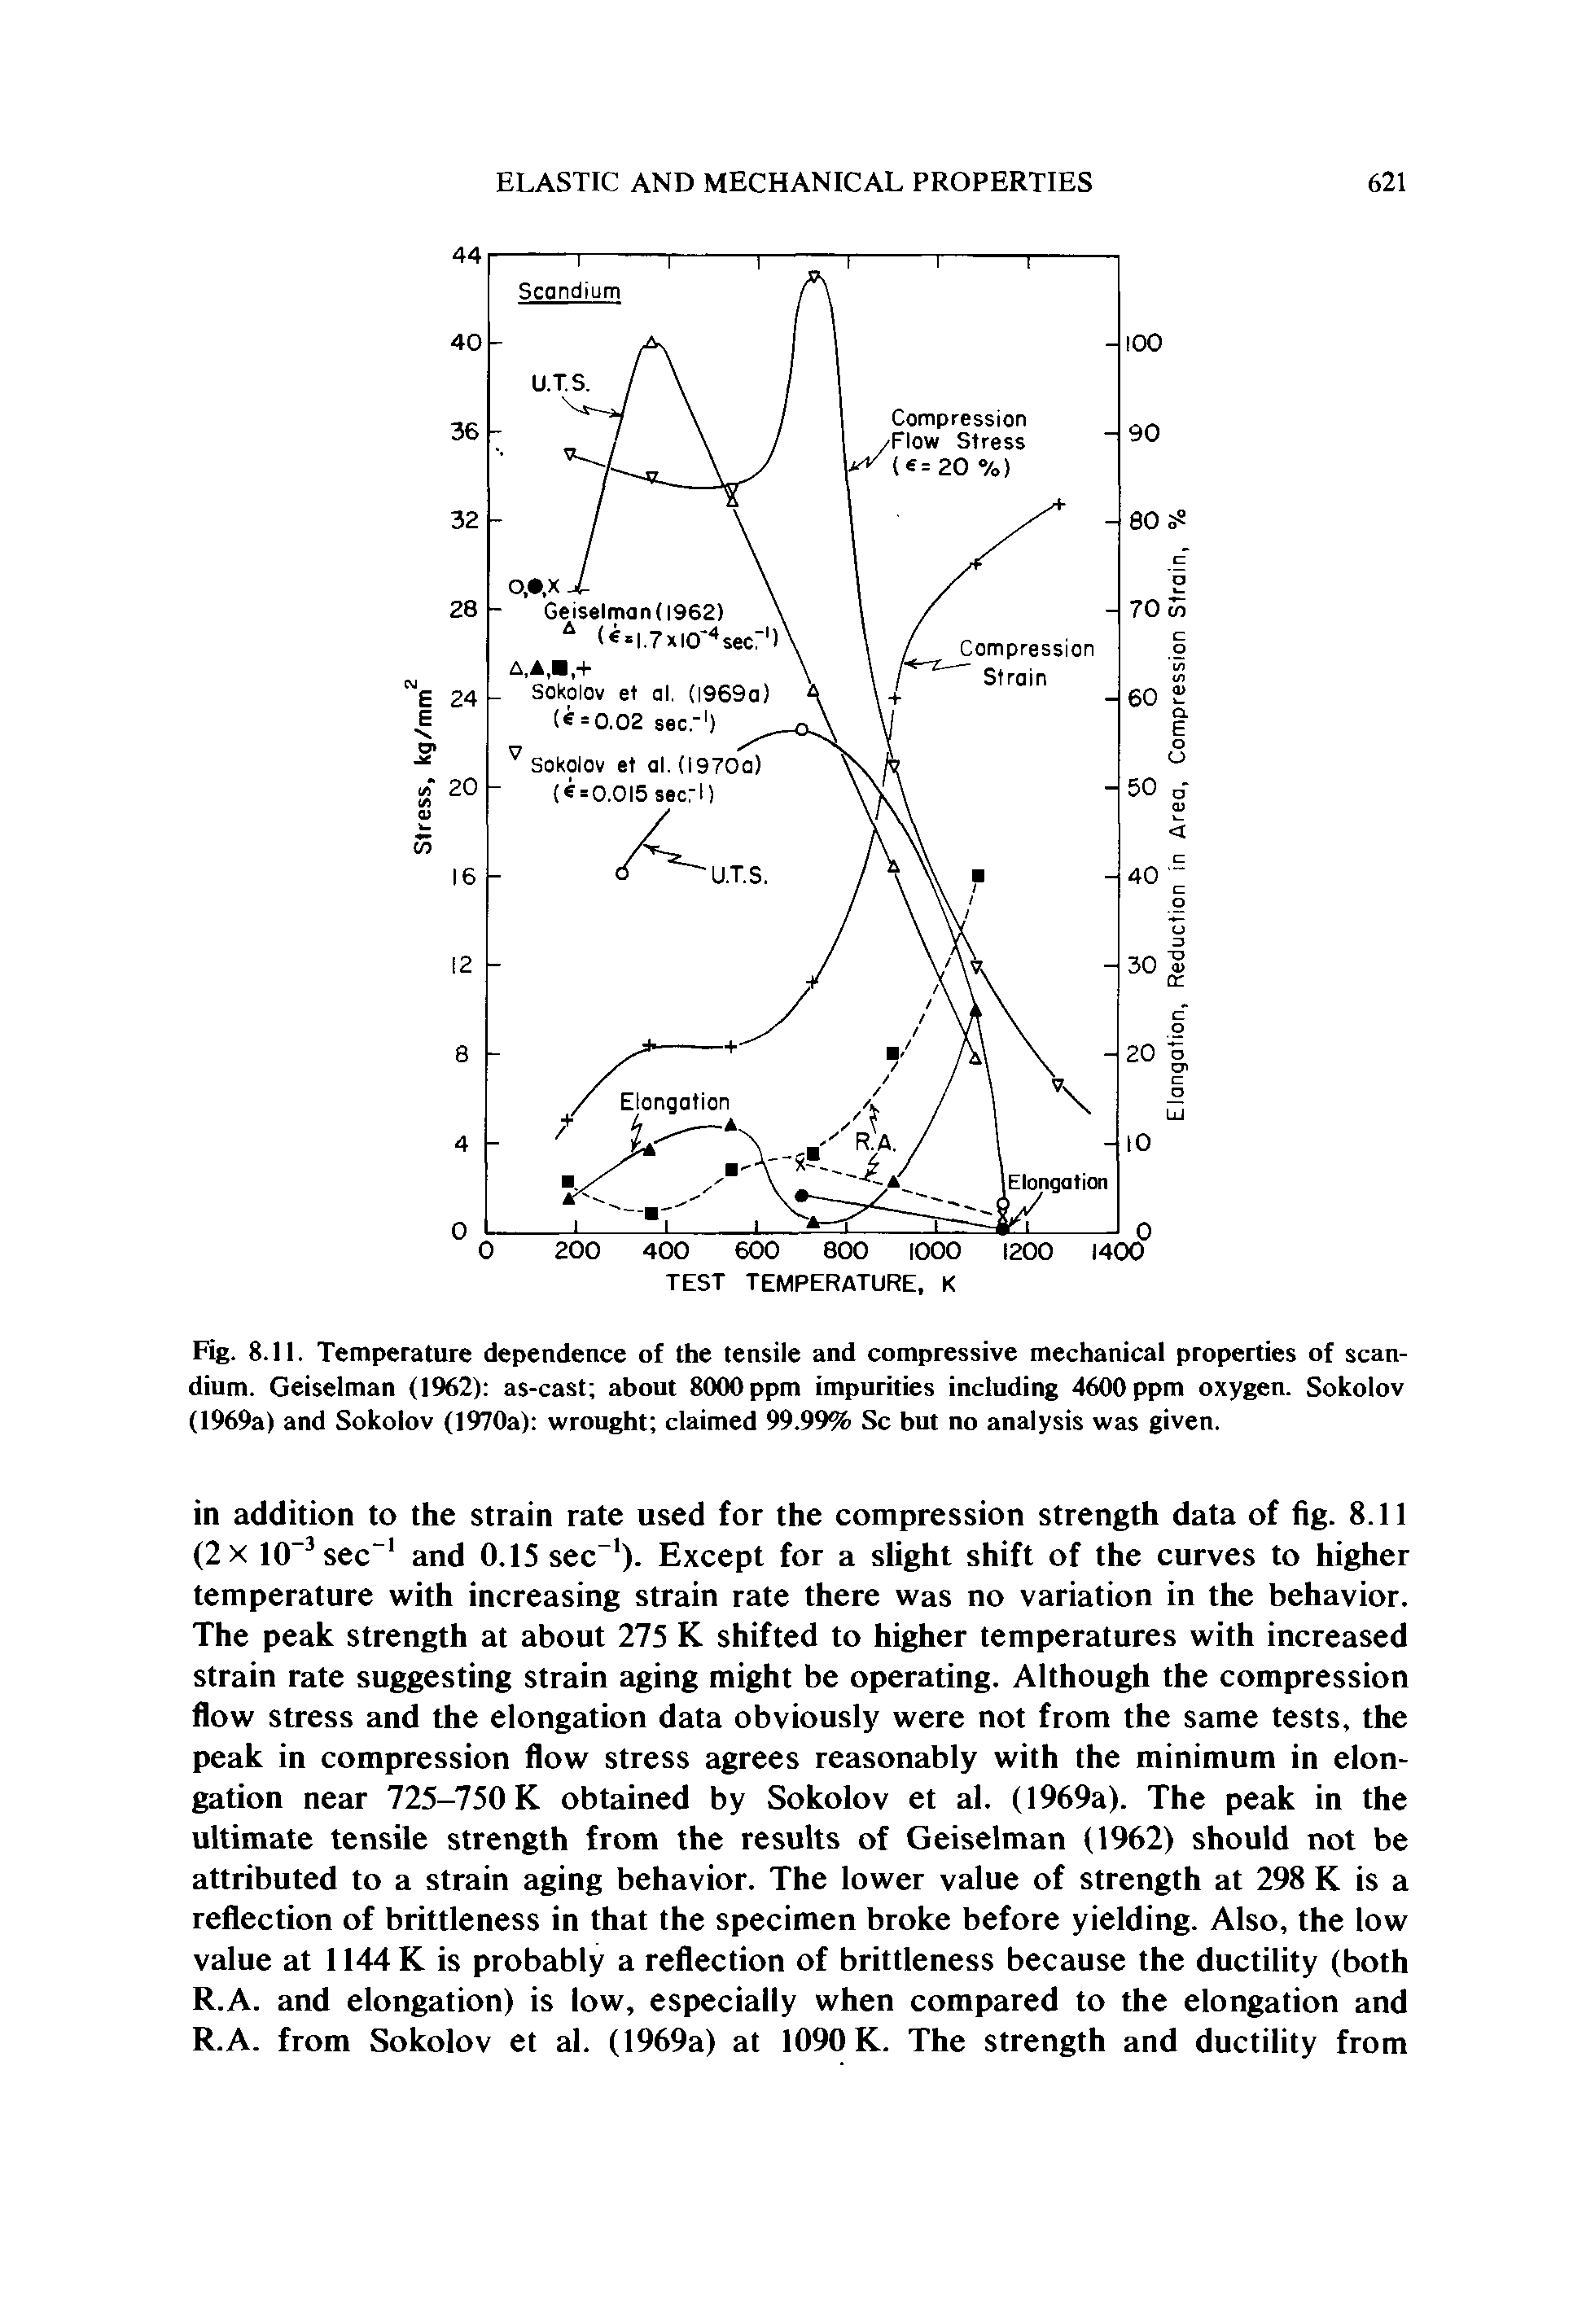 Fig. 8.11. Temperature dependence of the tensile and compressive mechanical properties of scandium. Geiselman (1%2) as-cast about 8000 ppm impurities including 4600 ppm oxygen. Sokolov (1969a) and Sokolov (1970a) wrought claimed 99.99% Sc but no analysis was given.